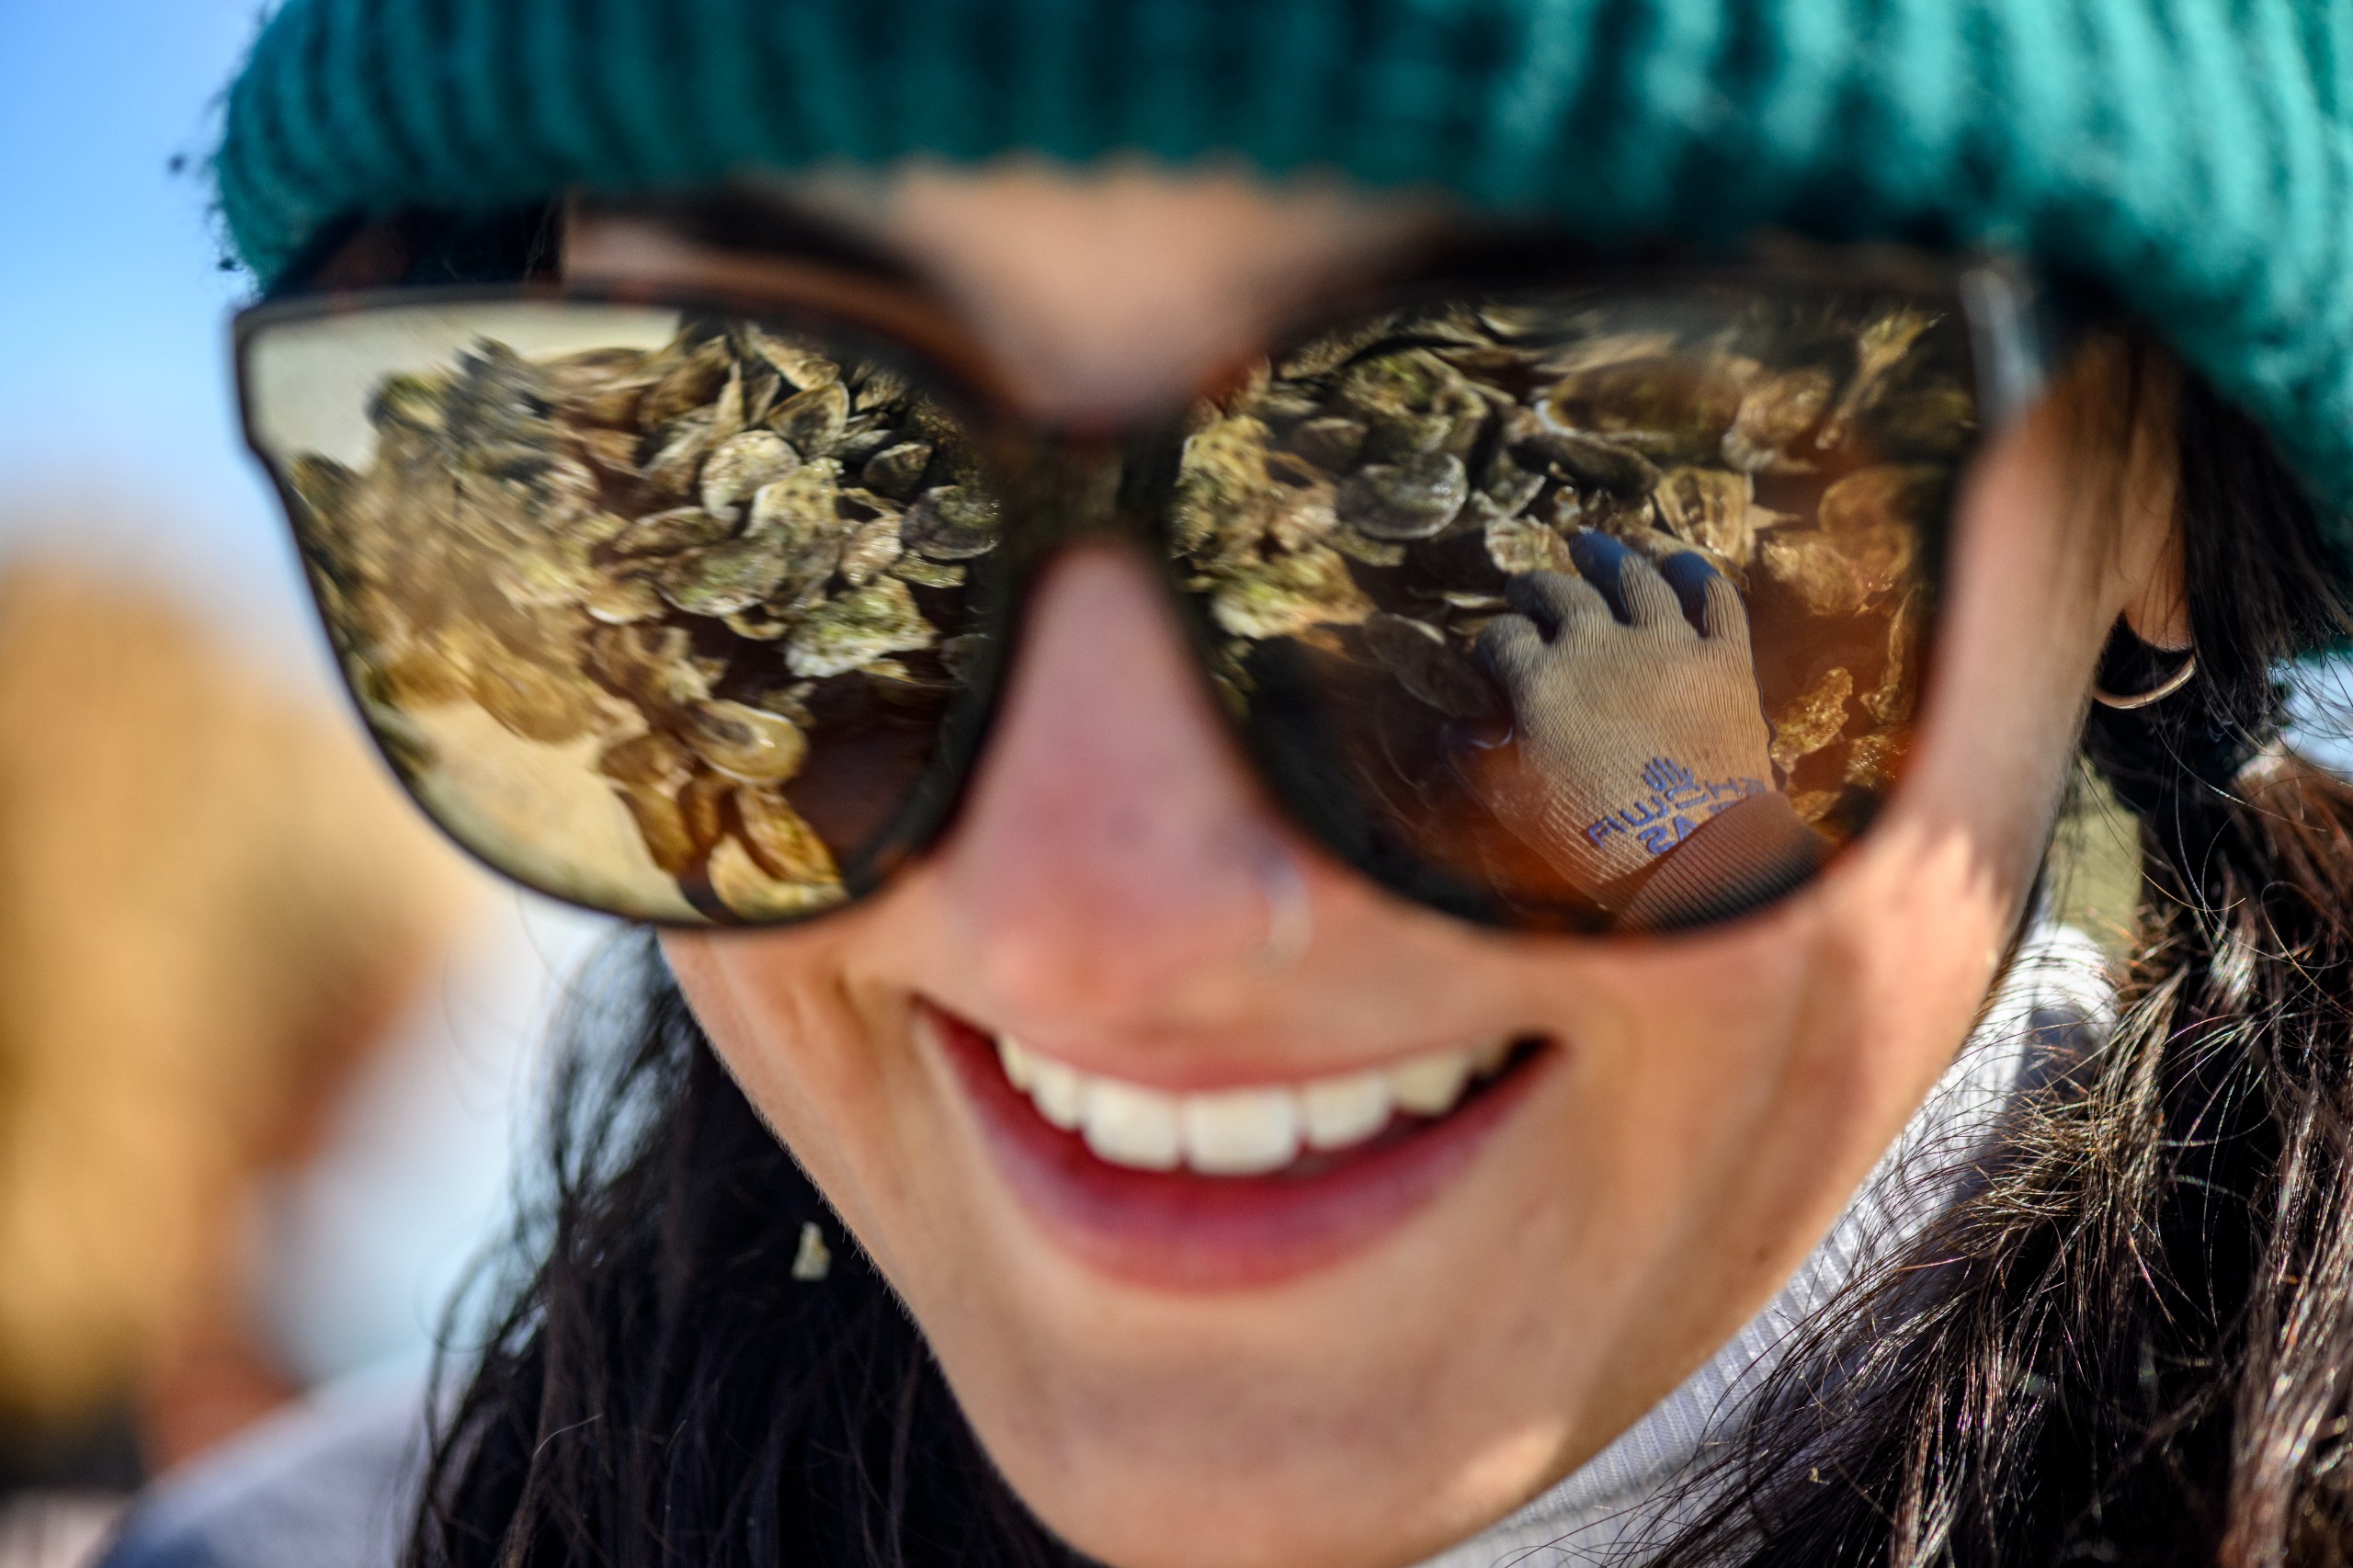 A smiling Nonesuch worker with a reflection of their hand culling oysters in their sunglasses.